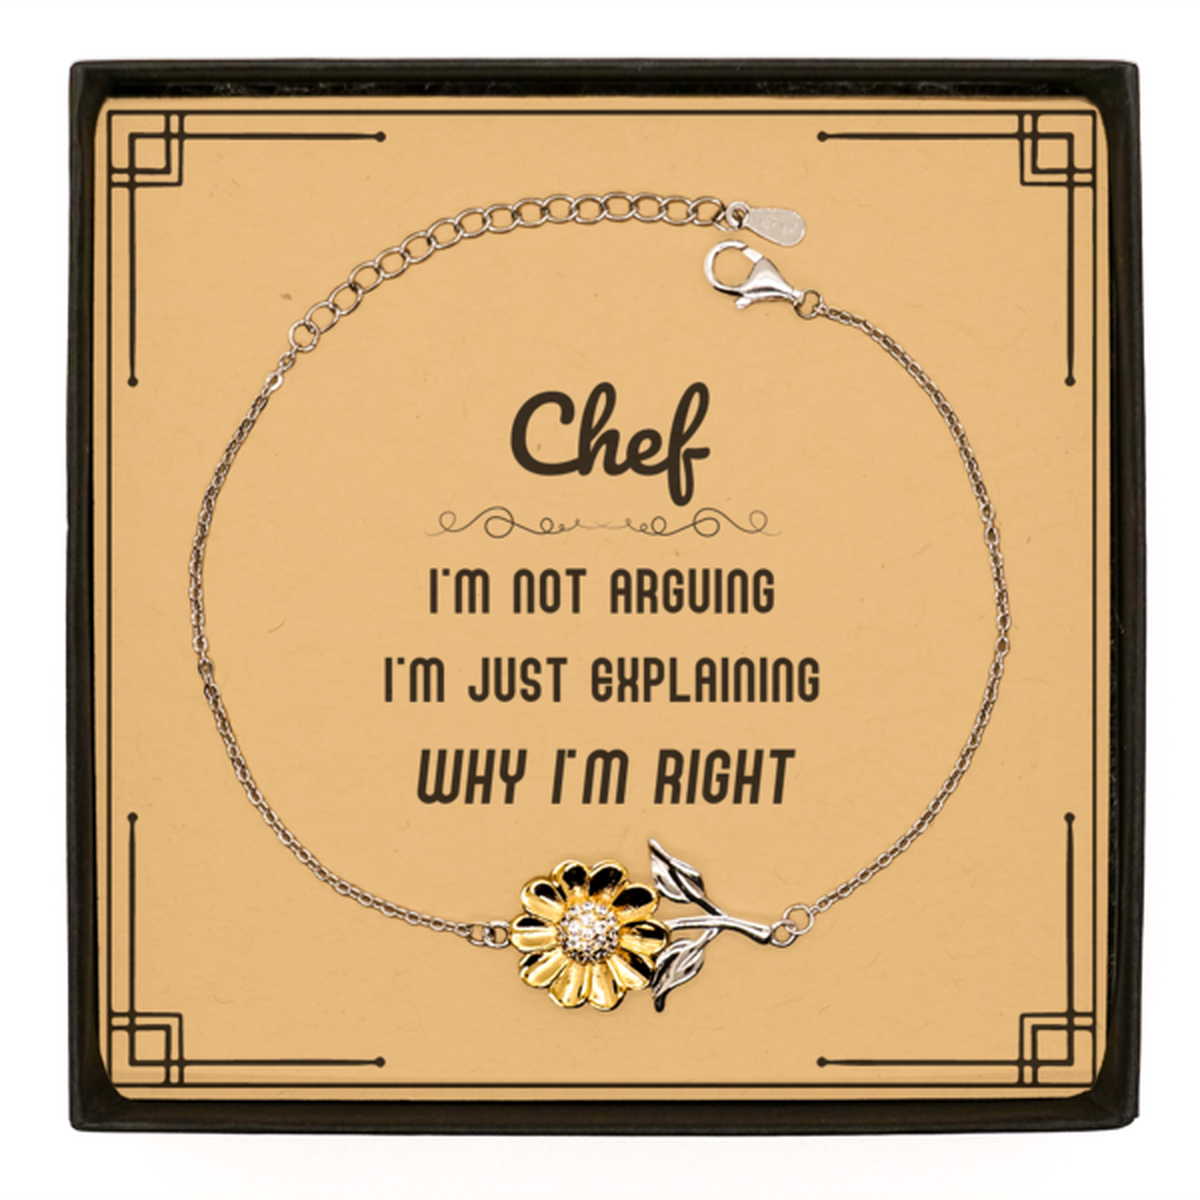 Chef I'm not Arguing. I'm Just Explaining Why I'm RIGHT Sunflower Bracelet, Funny Saying Quote Chef Gifts For Chef Message Card Graduation Birthday Christmas Gifts for Men Women Coworker